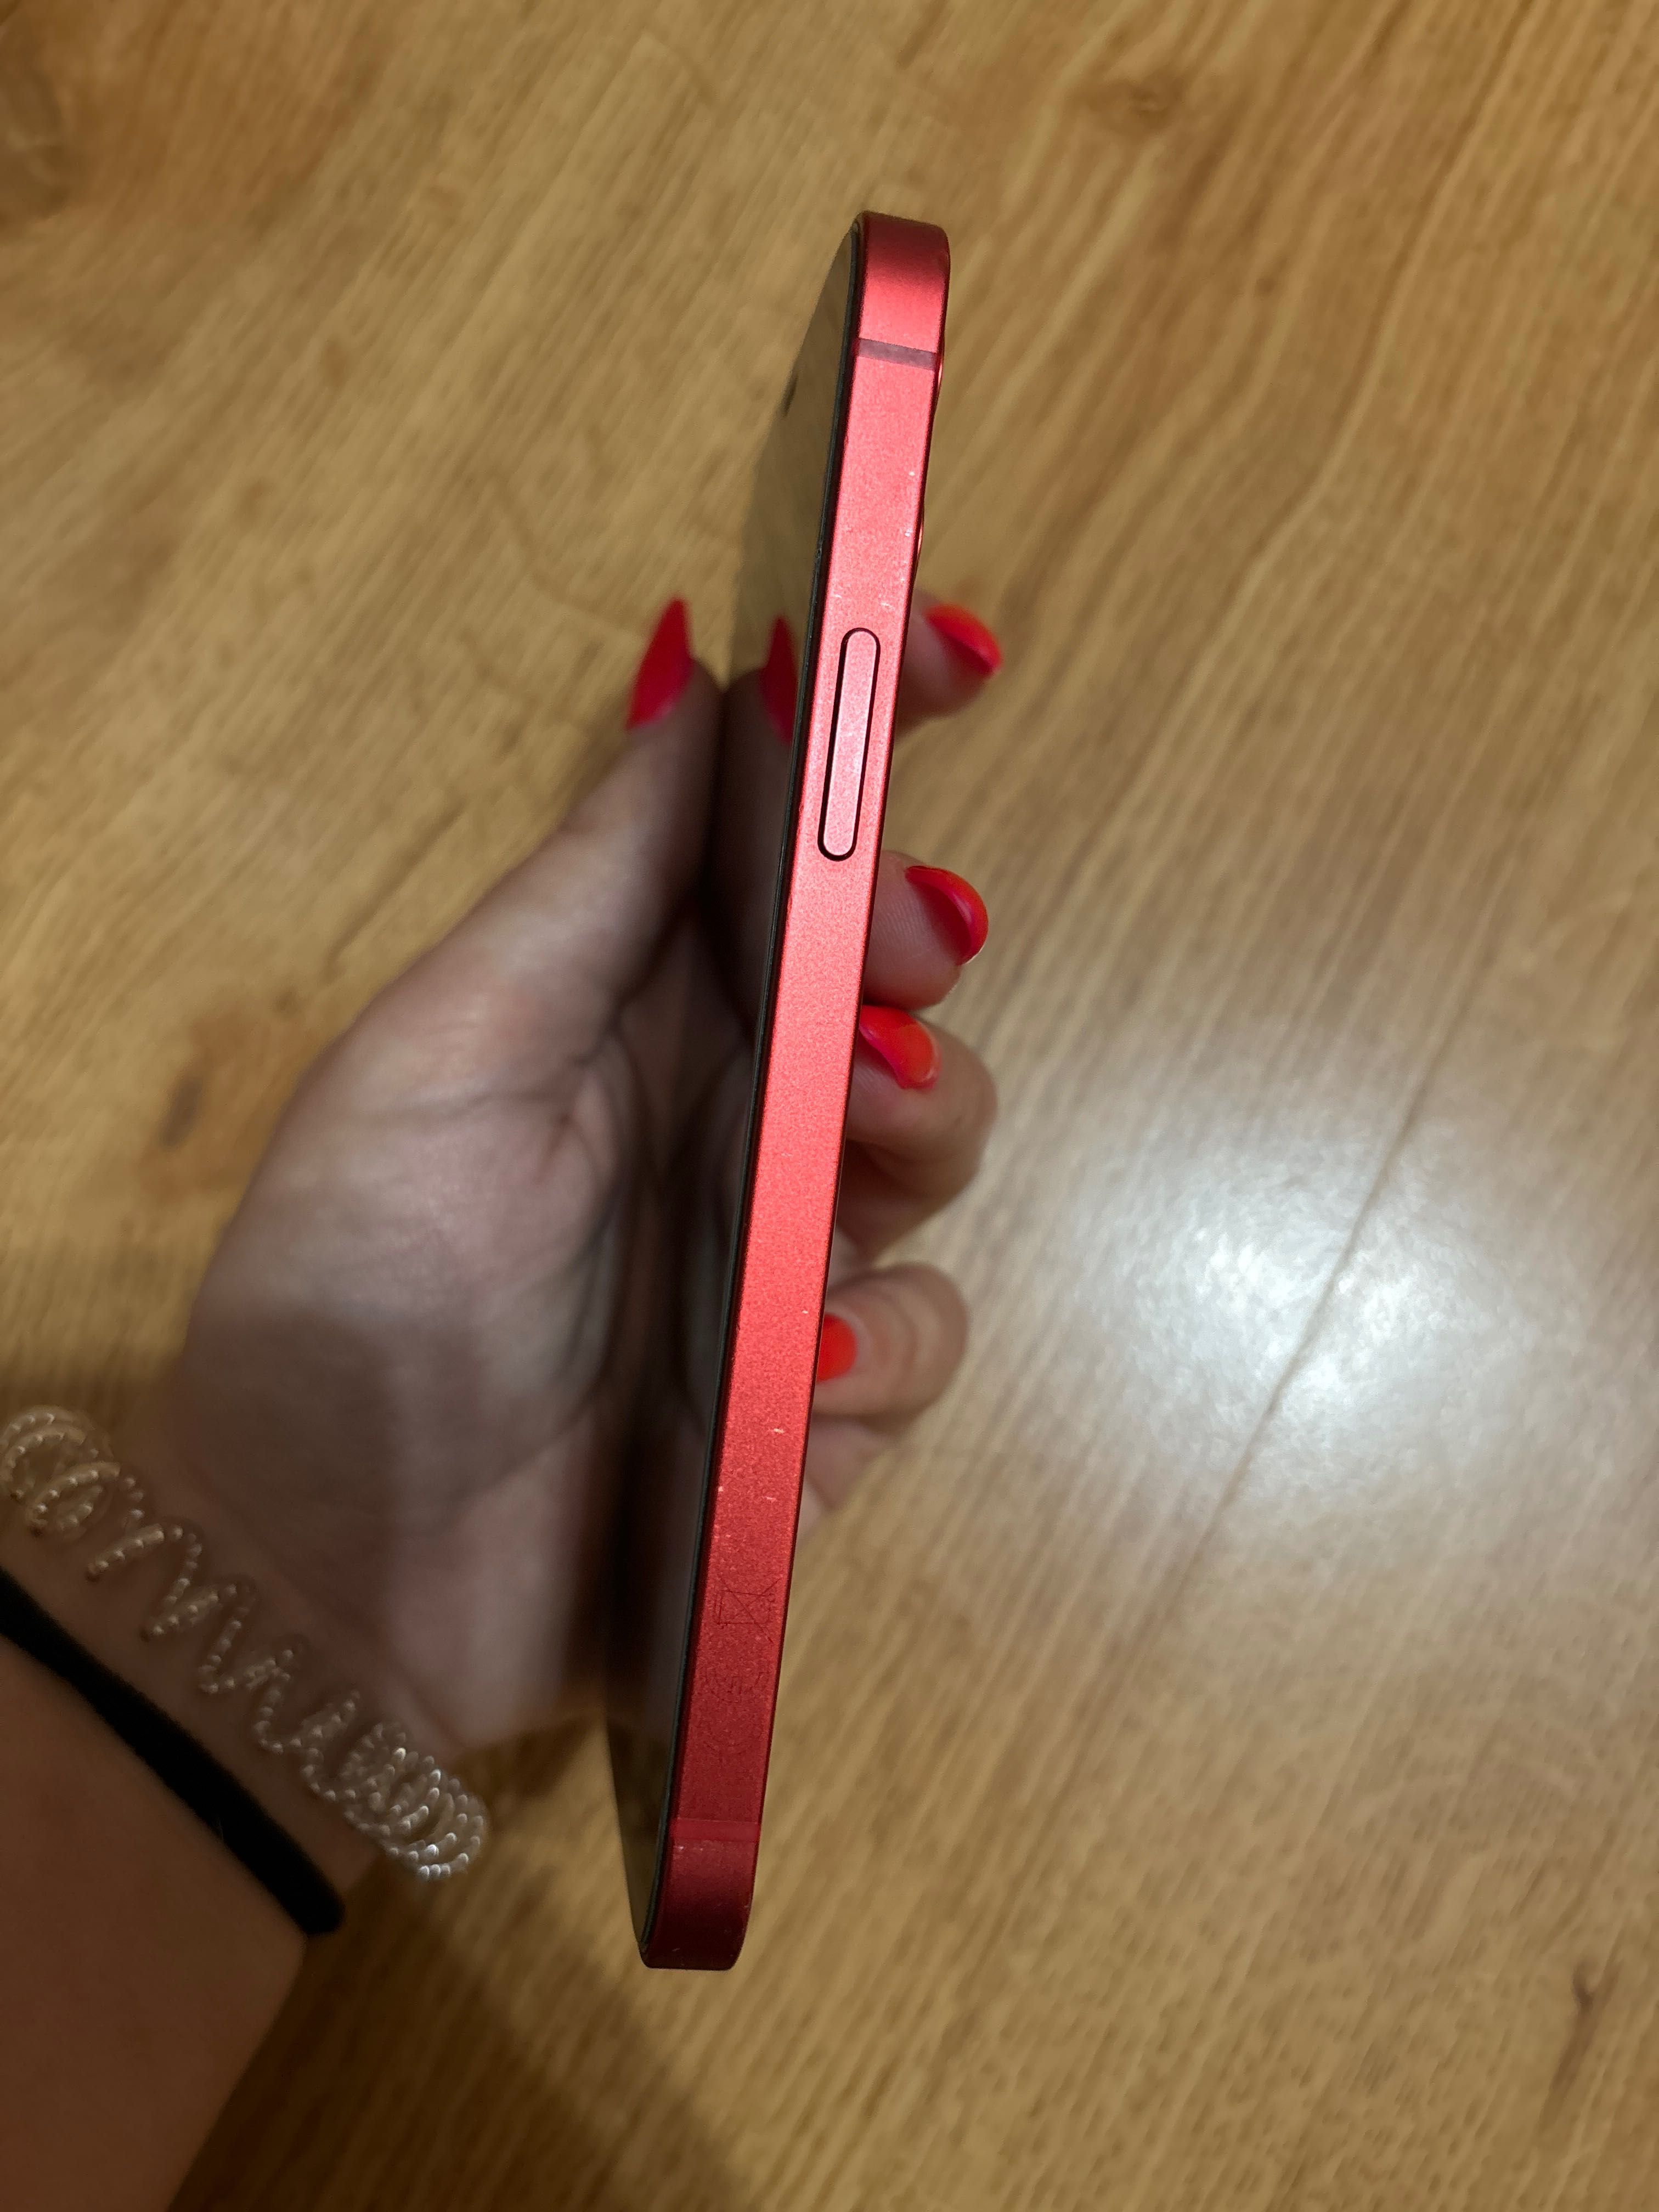 IPhone 12 red 64GB